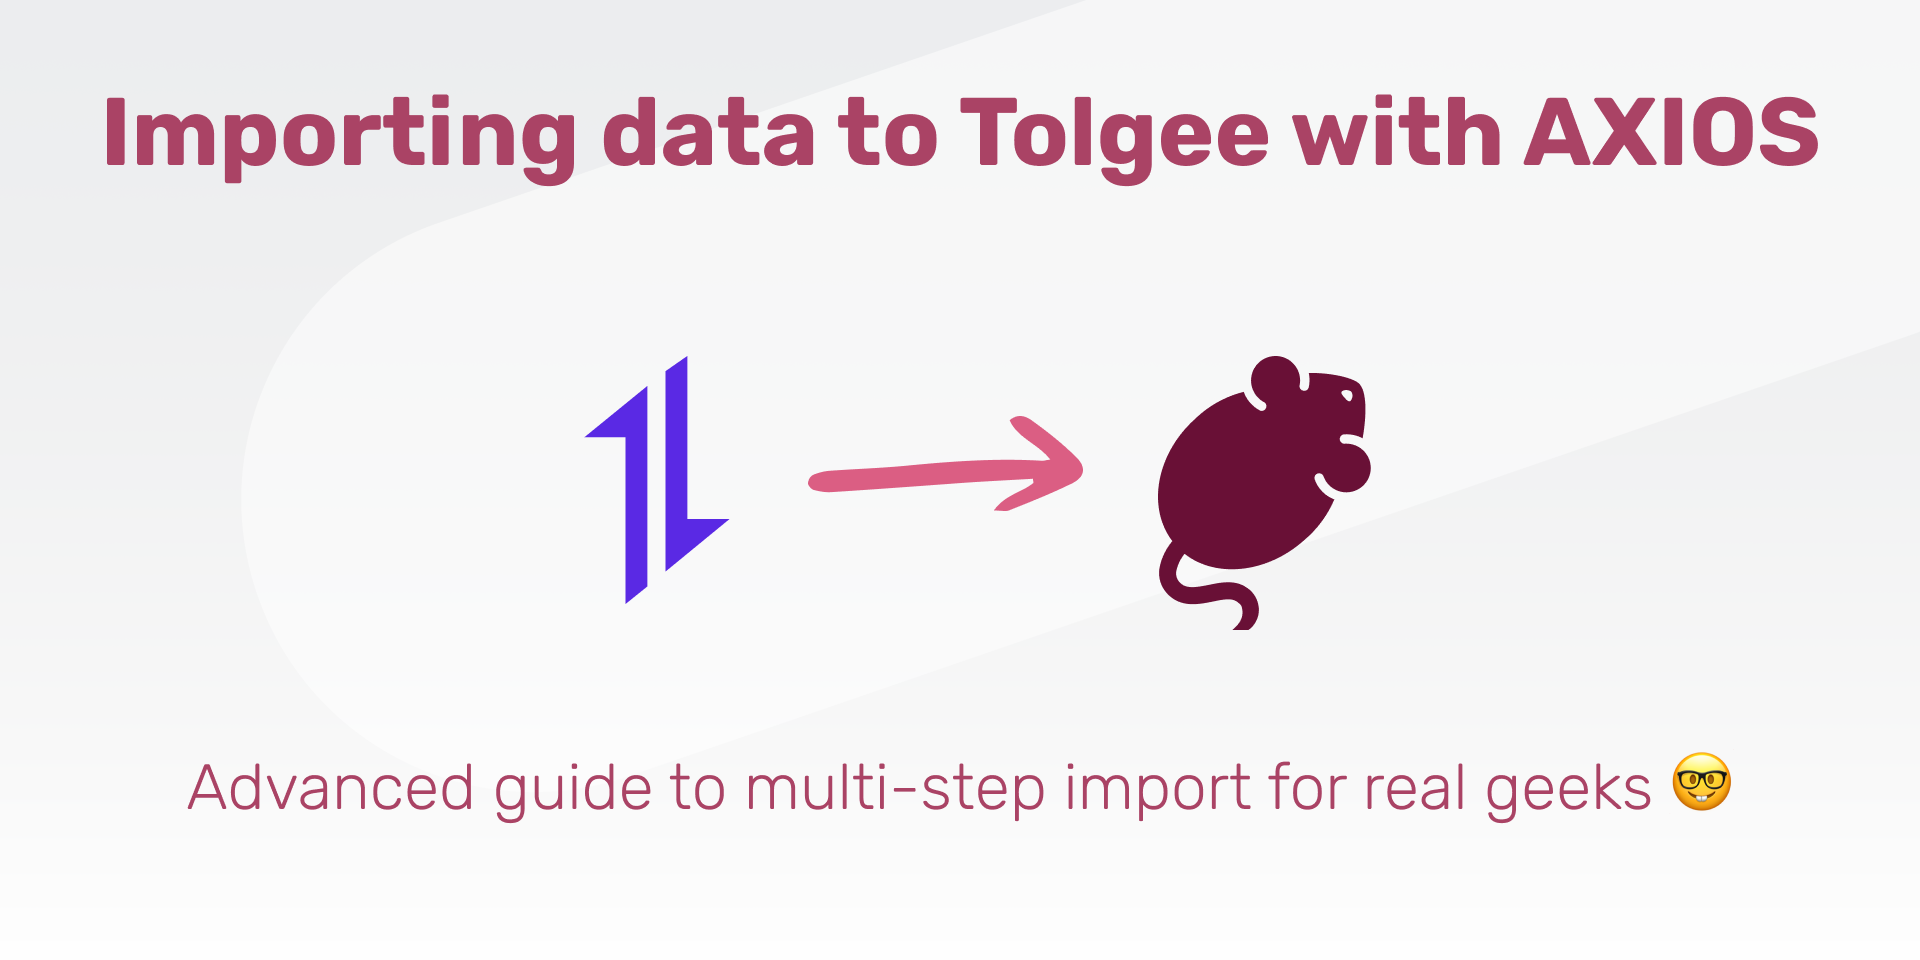 Importing data to Tolgee using Axios